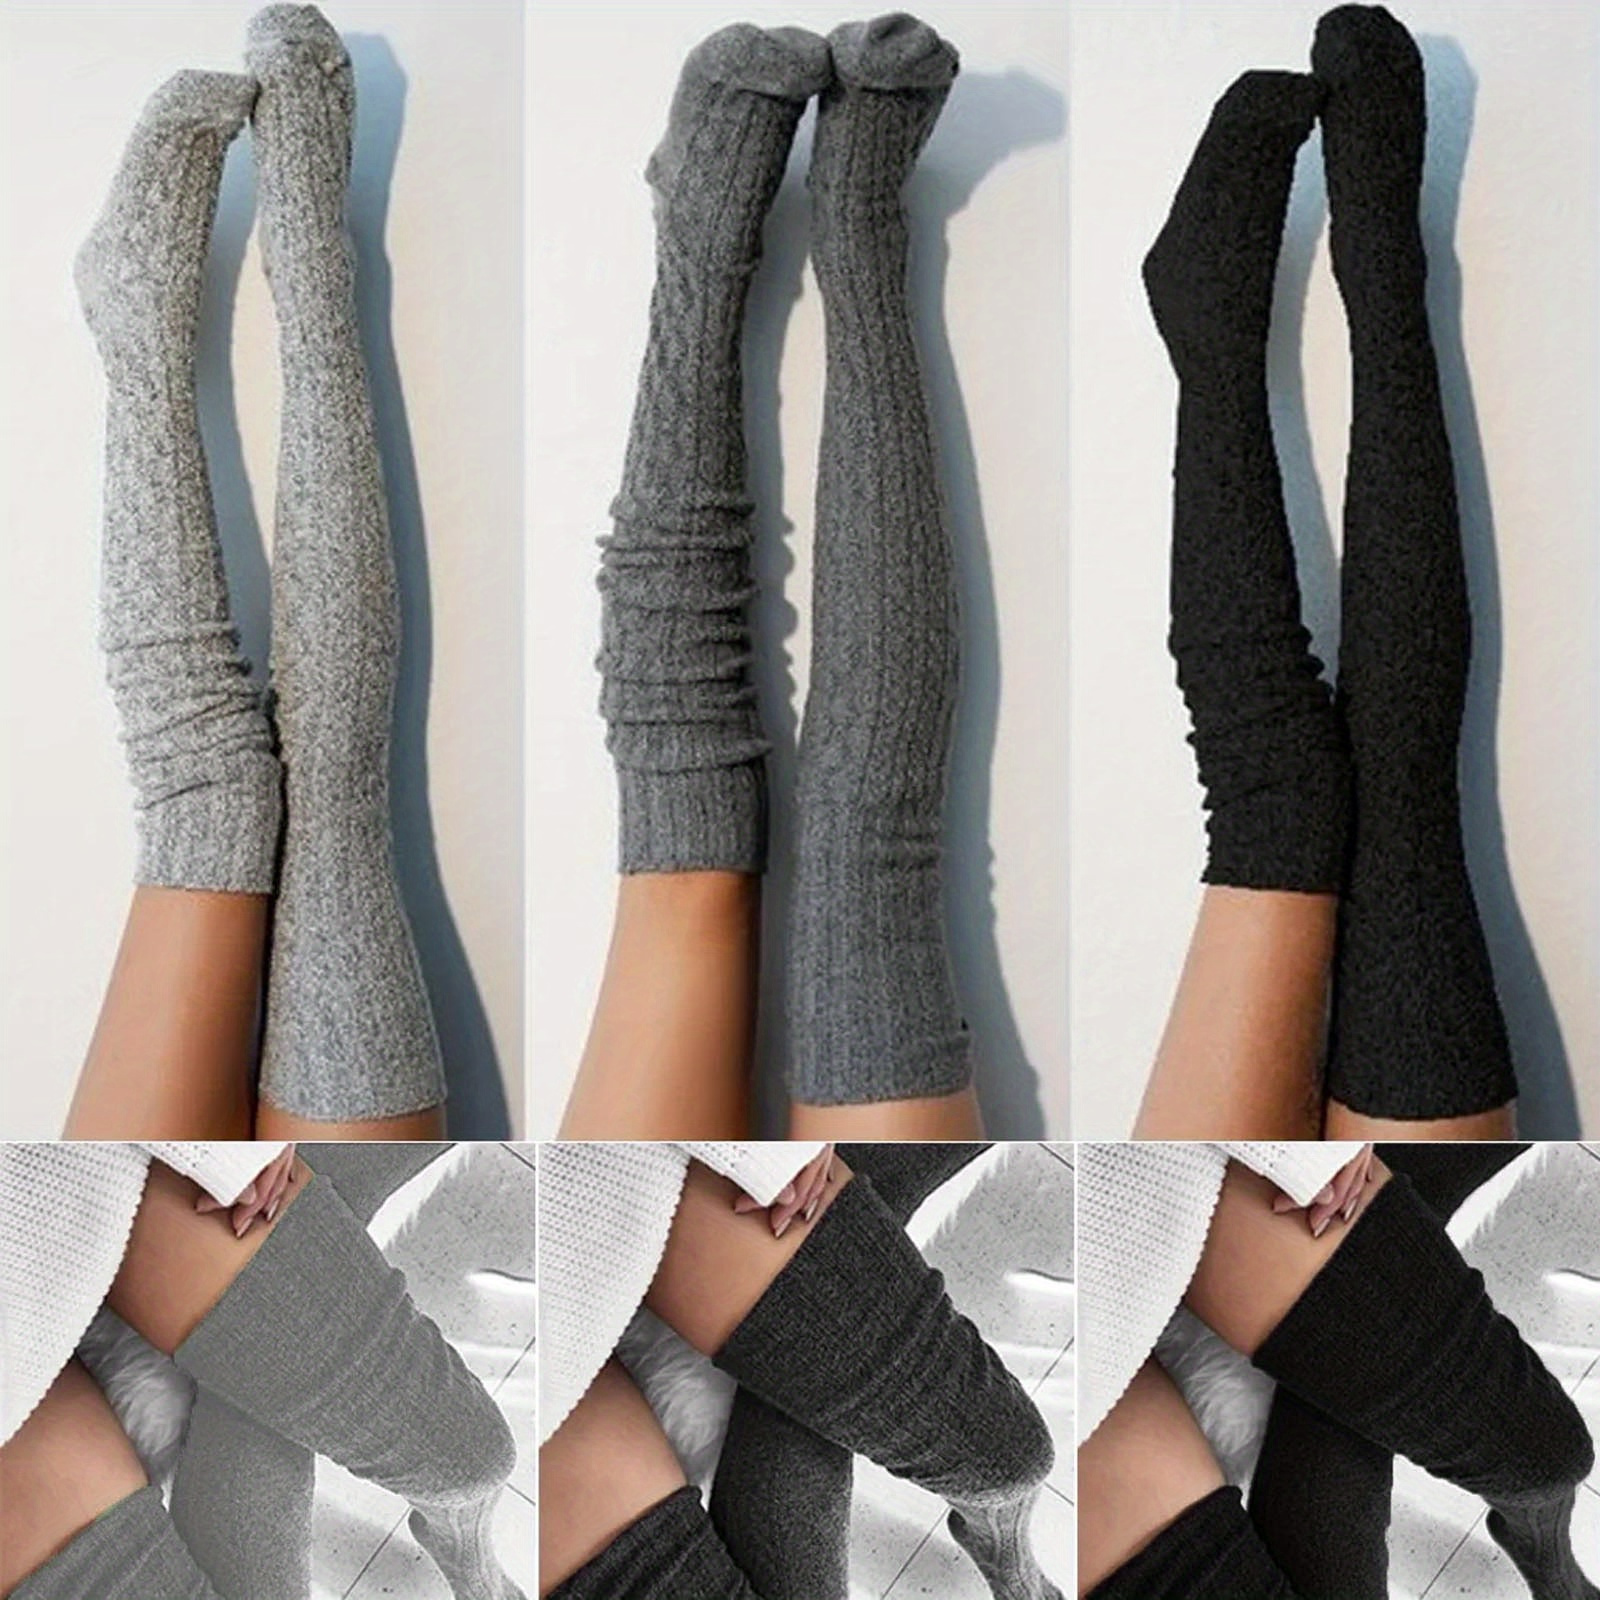 Vogue Hosiery - Favorite knit, hot chocolate and cashmere socks